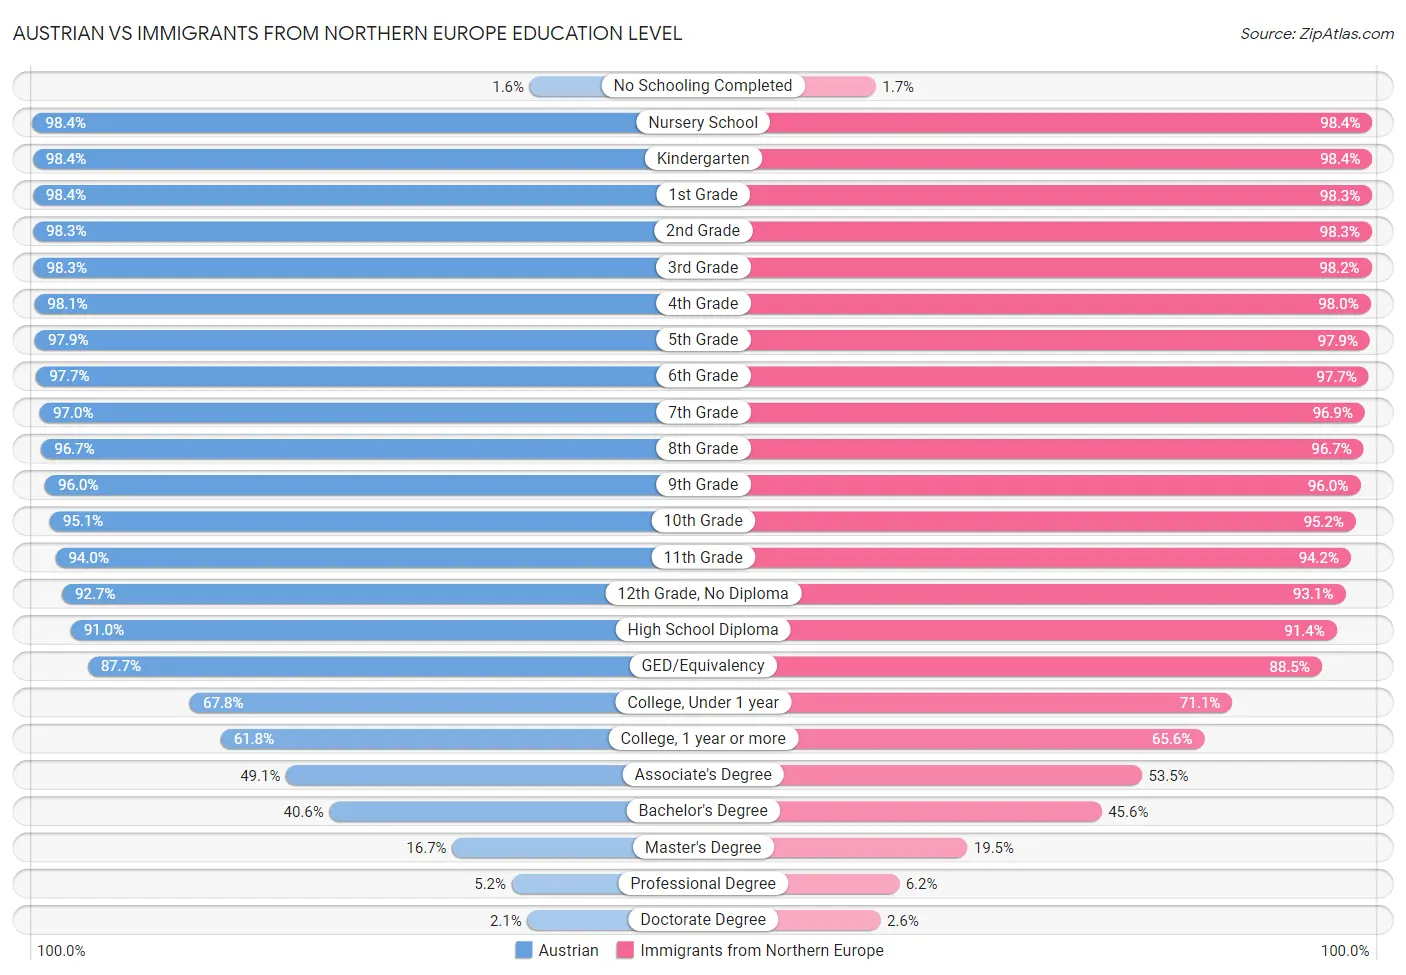 Austrian vs Immigrants from Northern Europe Education Level